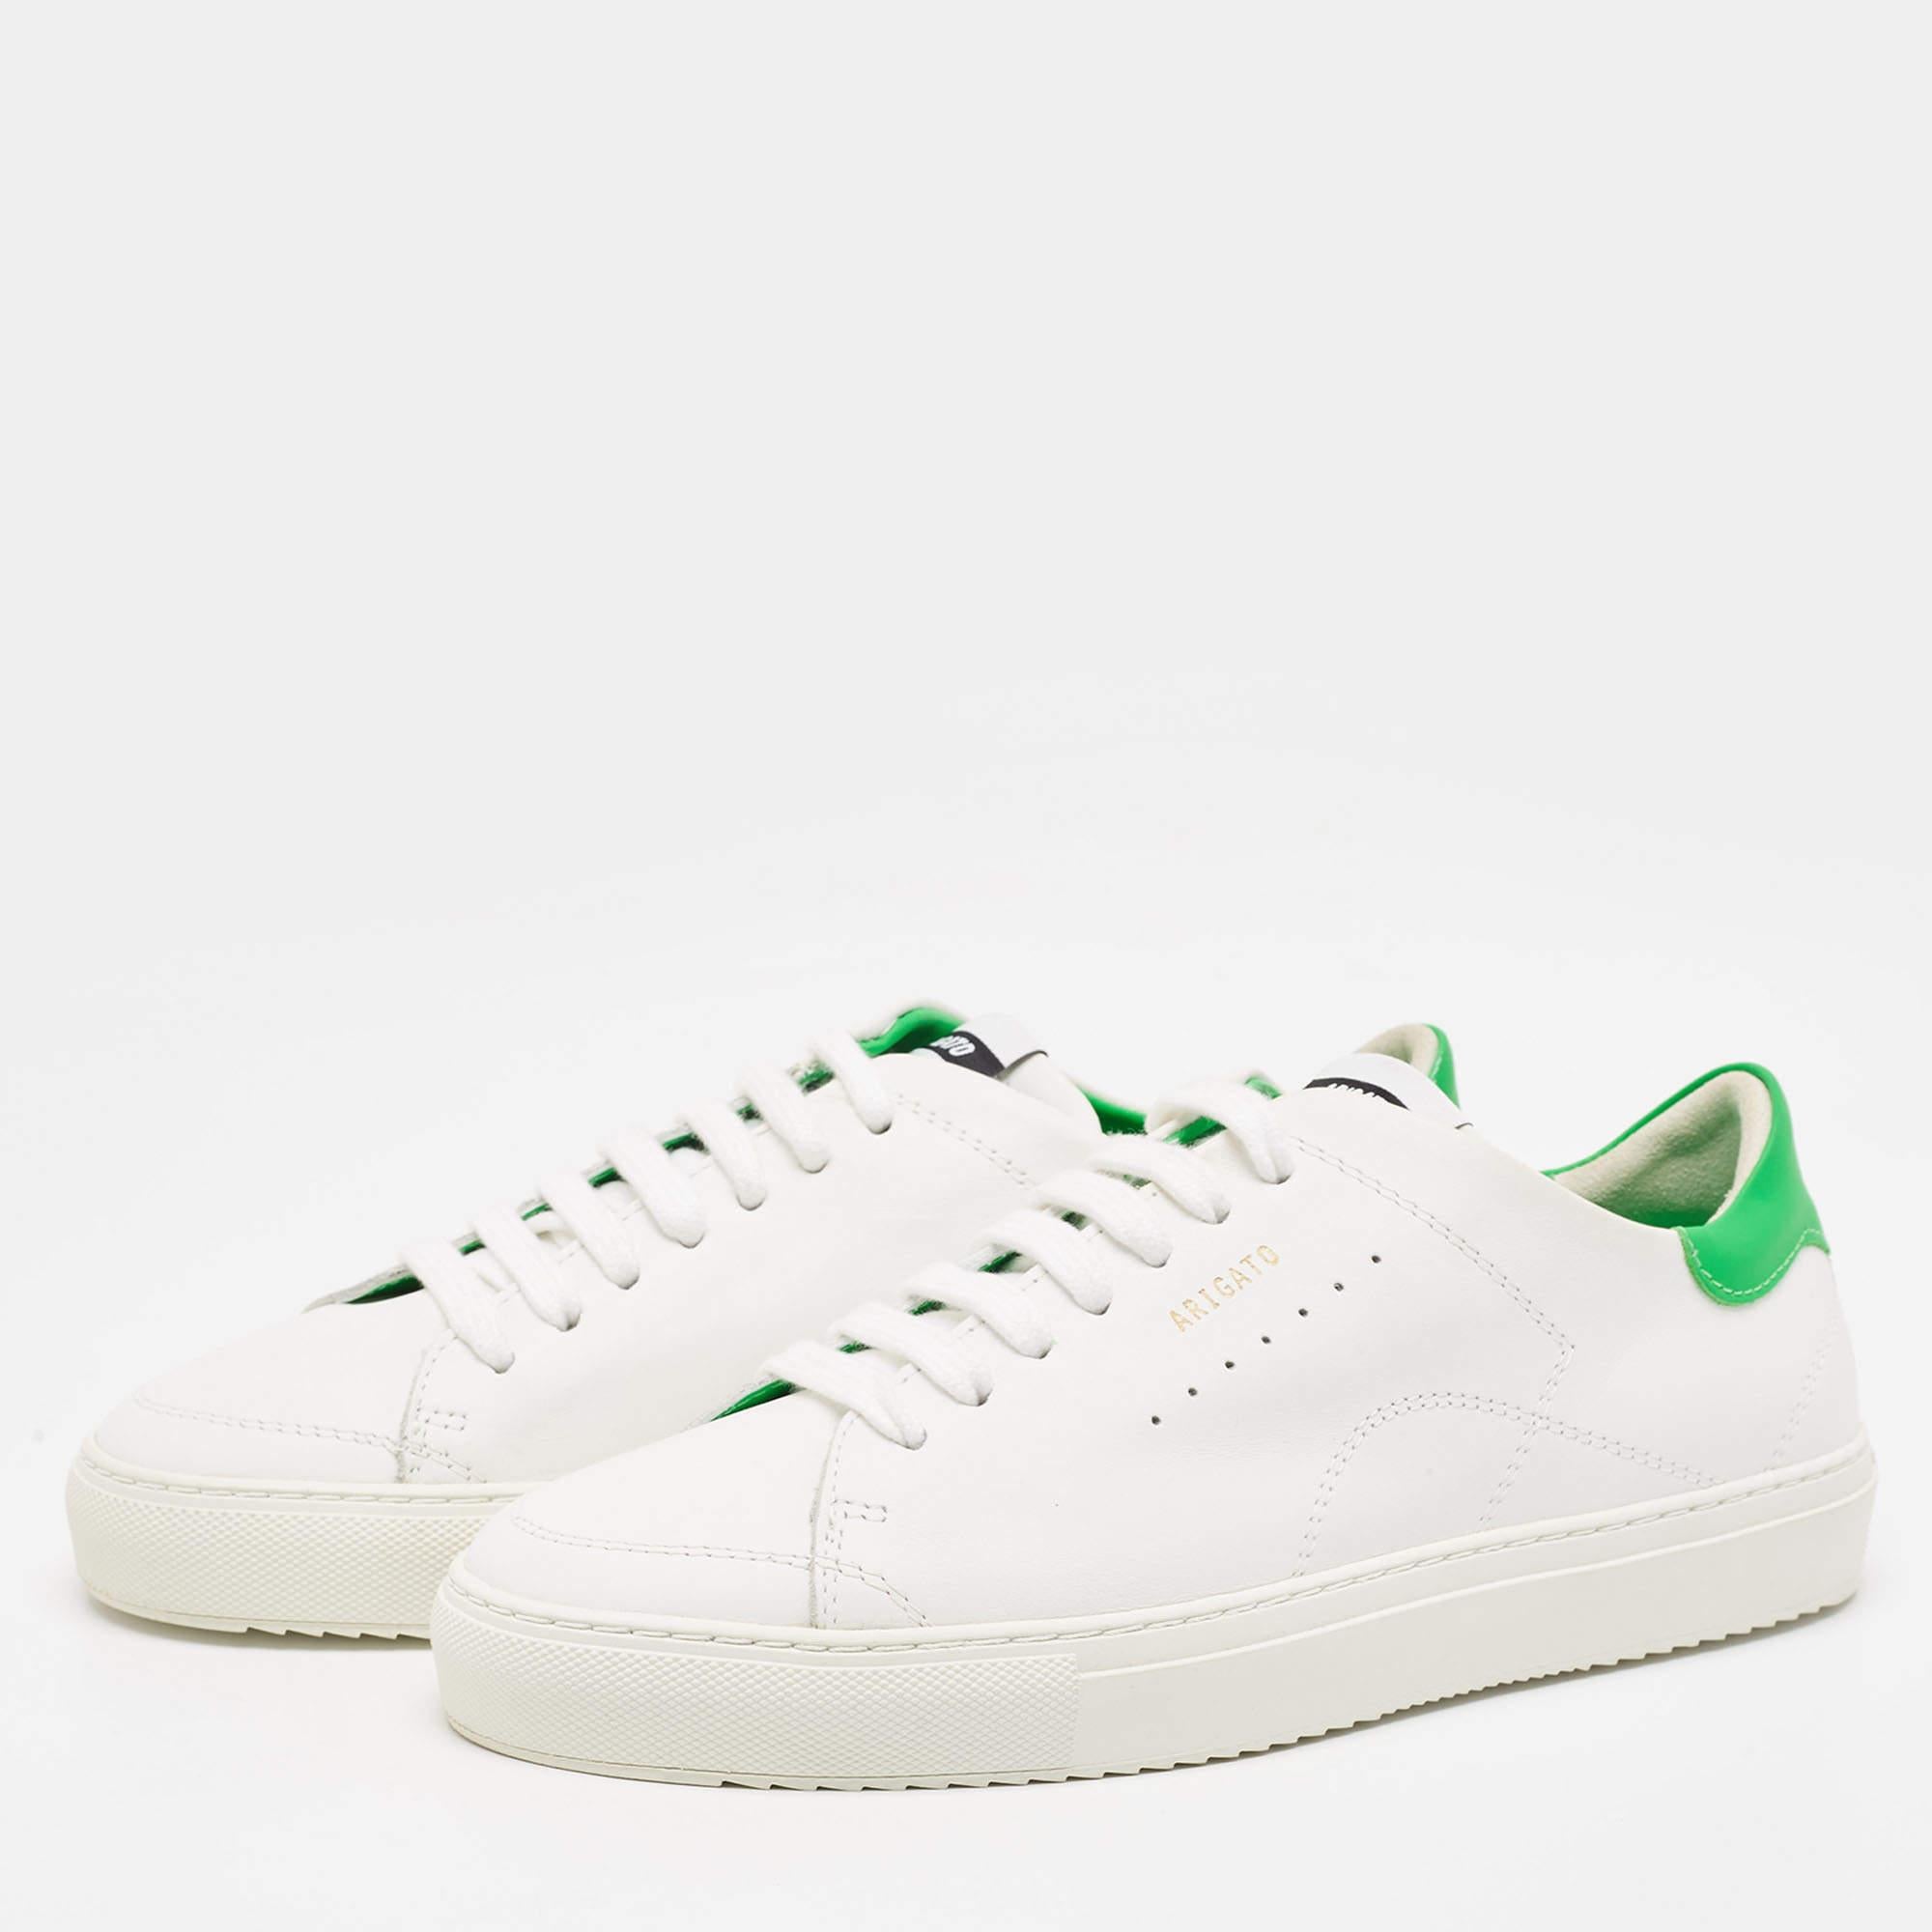 Axel Arigato White/Green Leather Clean Sneakers Size 40 For Sale 2